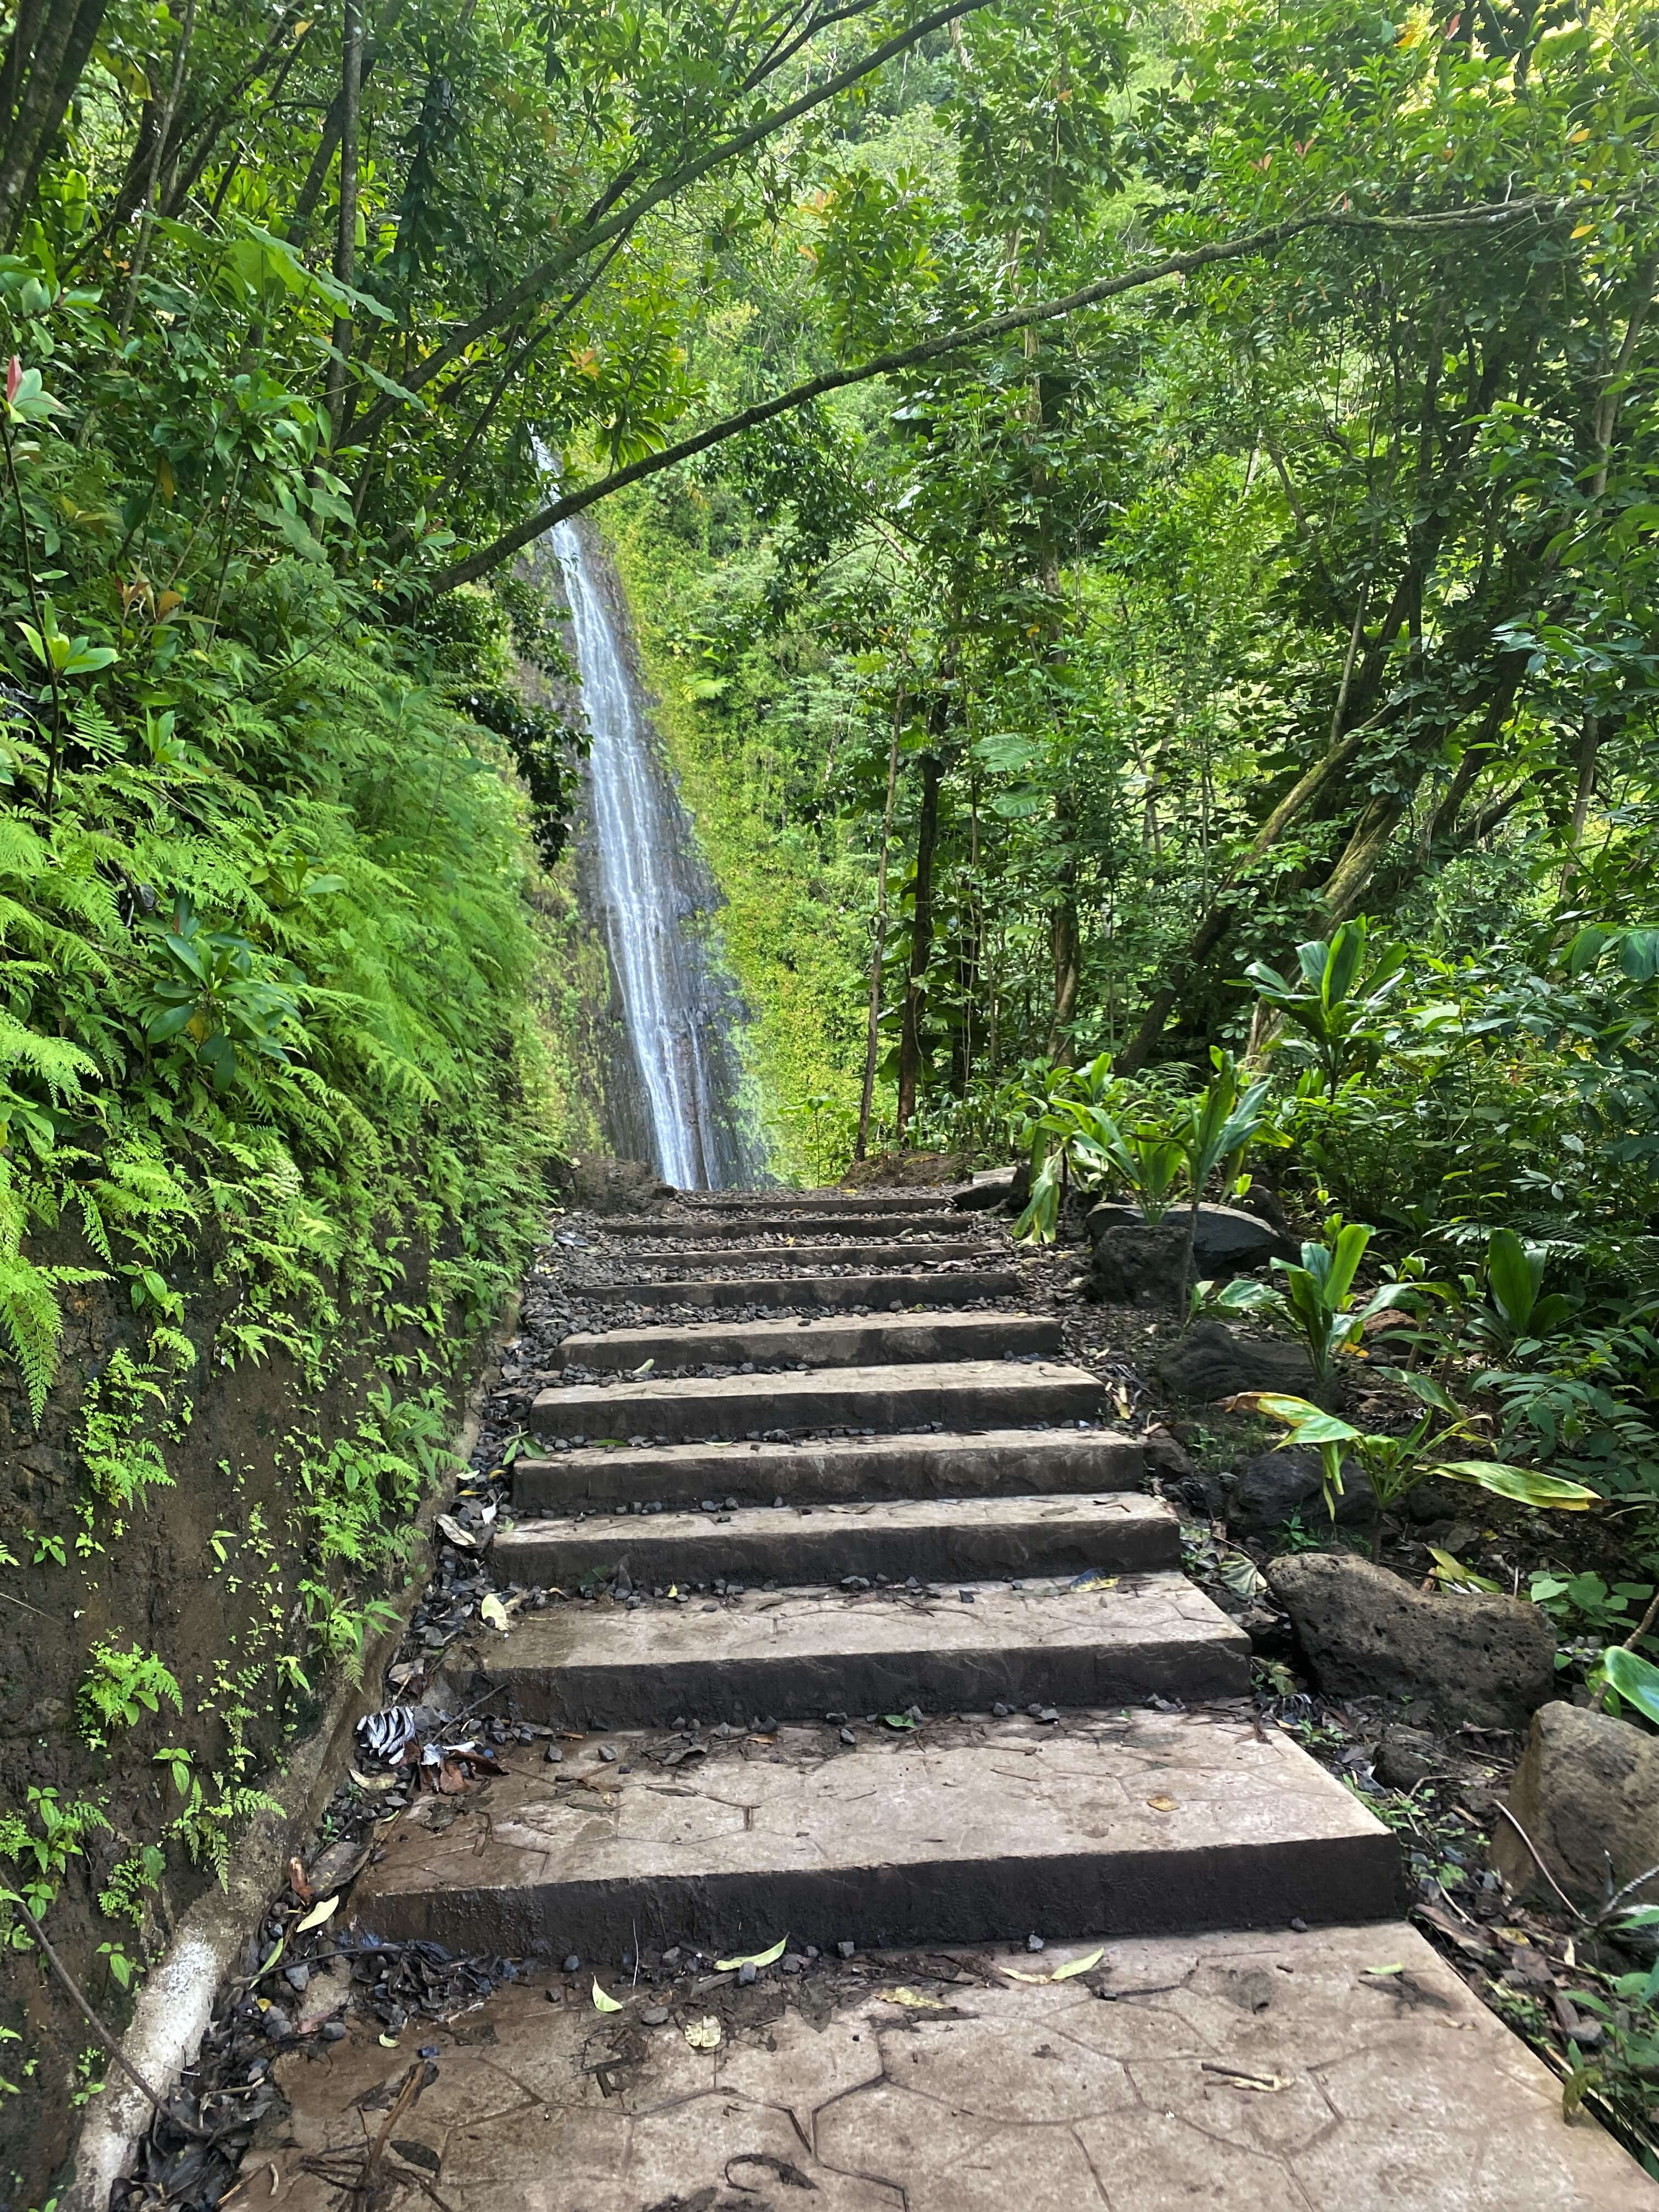 Stairs up to a Waterfall